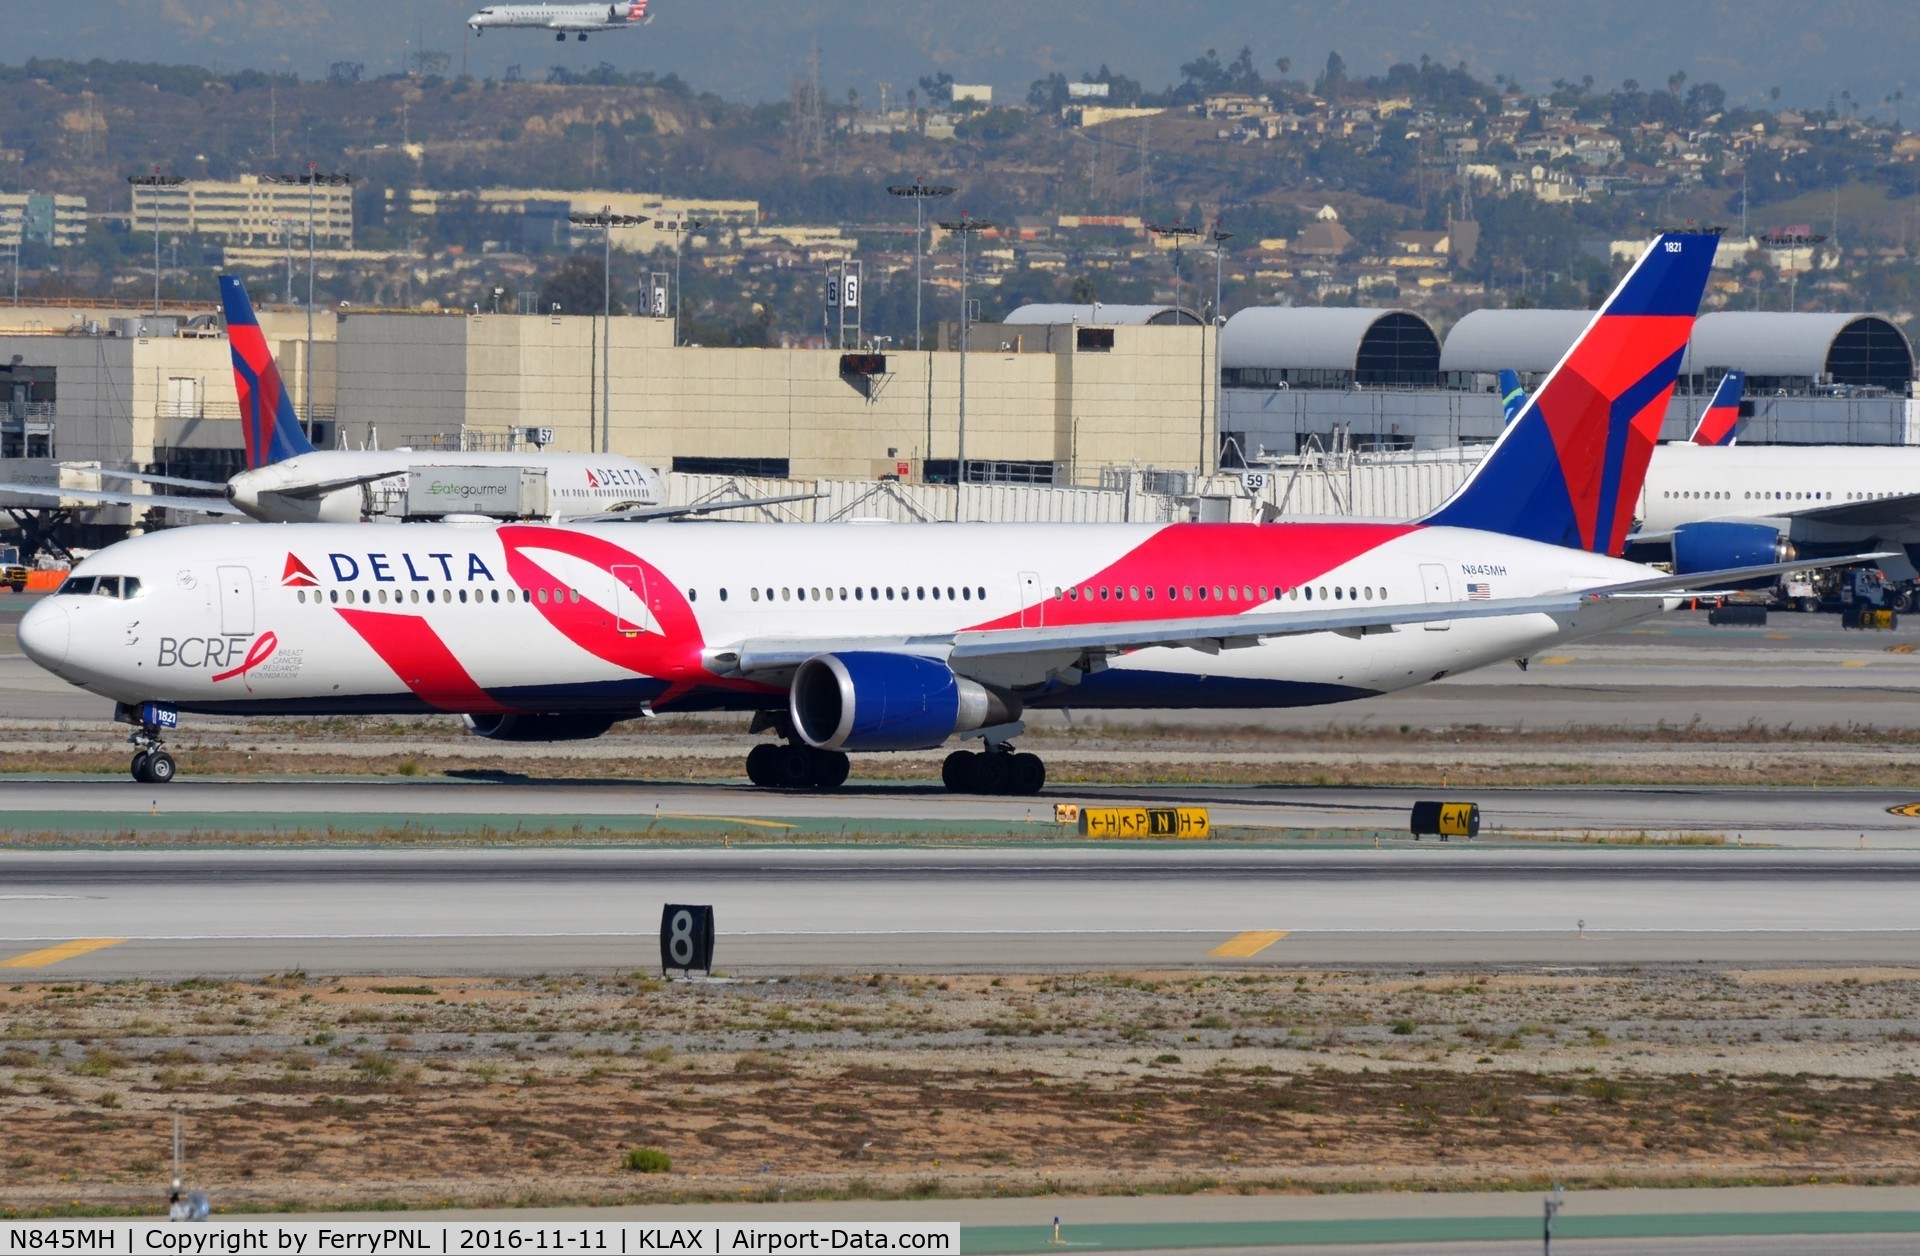 N845MH, 2002 Boeing 767-432/ER C/N 29719, The Pink Ribbon B764 of Delta in LAX.